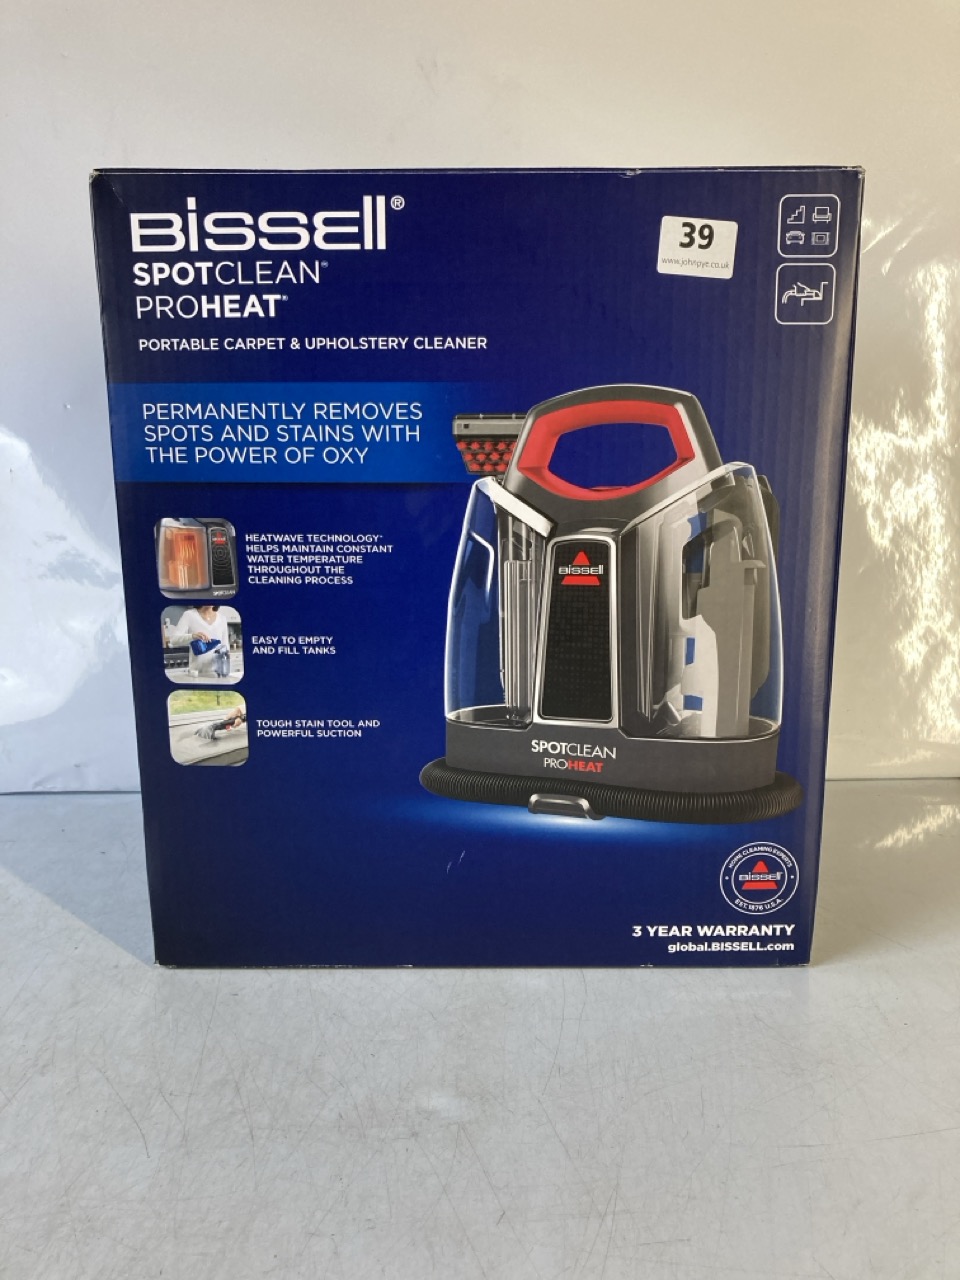 A BISSELL SPOT CLEAN/PROHEAT PORTABLE CARPET & UPHOLSTERY CLEANER, 36981 RRP £99.00